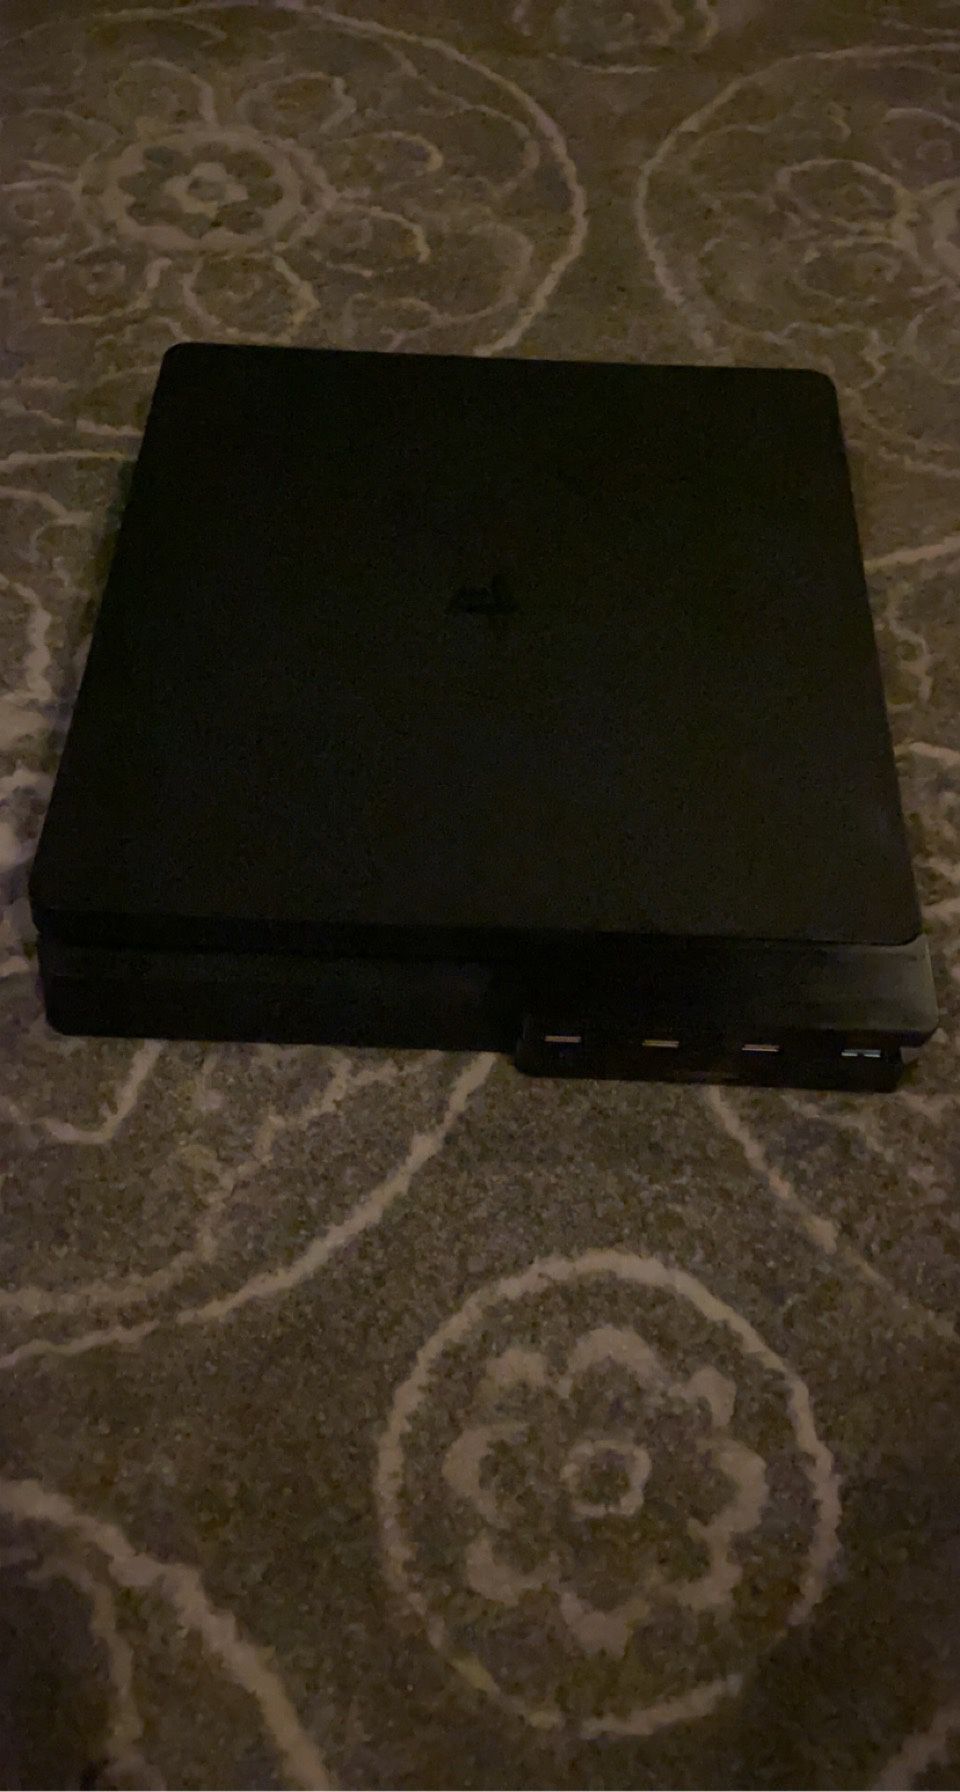 PlayStation 4 with Mouse Keyboard, Games etc